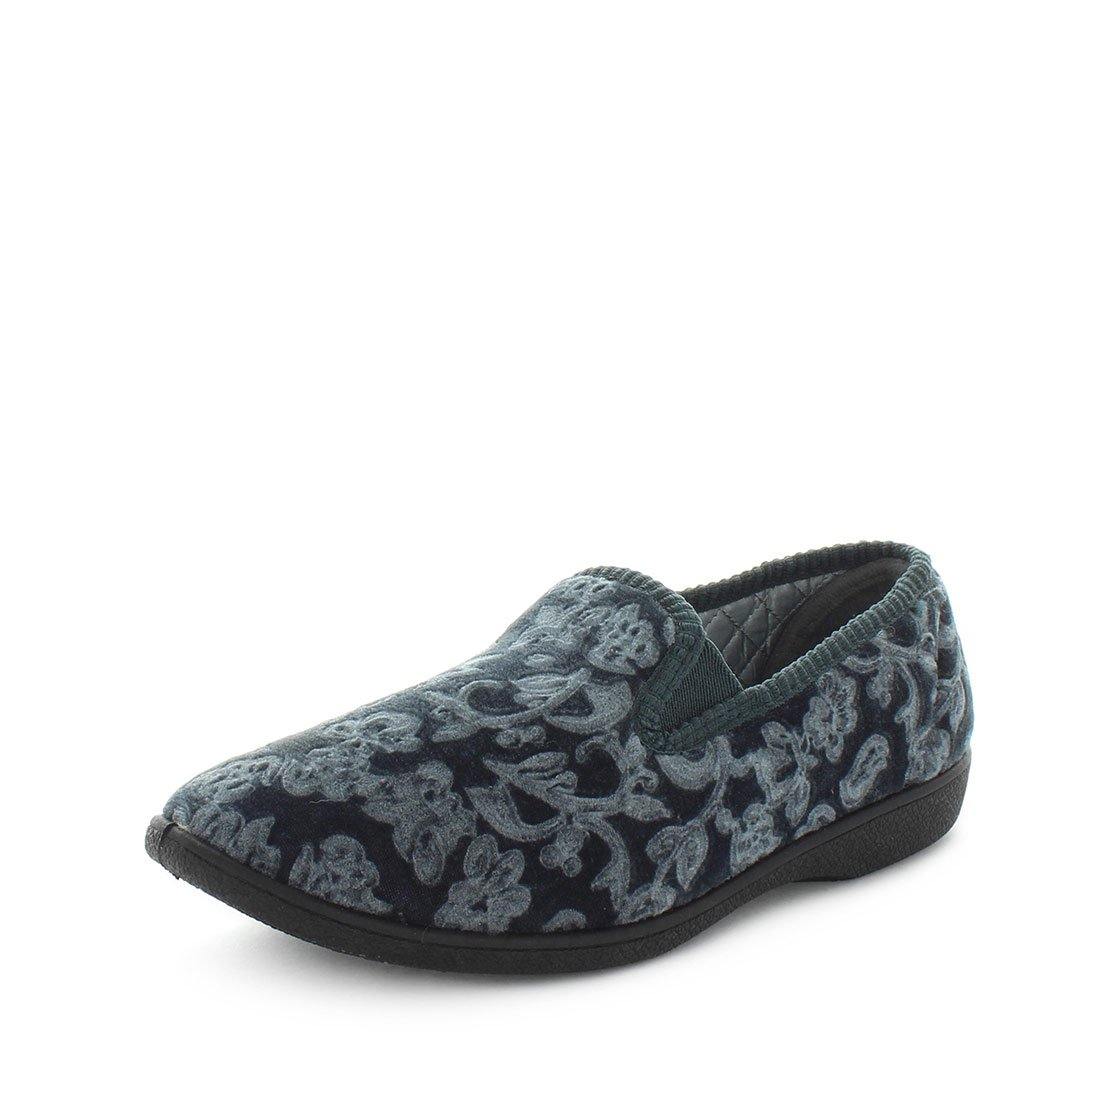 womens slippers - Grey Erta slipper, by panda Slippers. A slip on style slipper with embossed velour twin gussets and a quilted satin lining and sock for a soft to the touch feel.